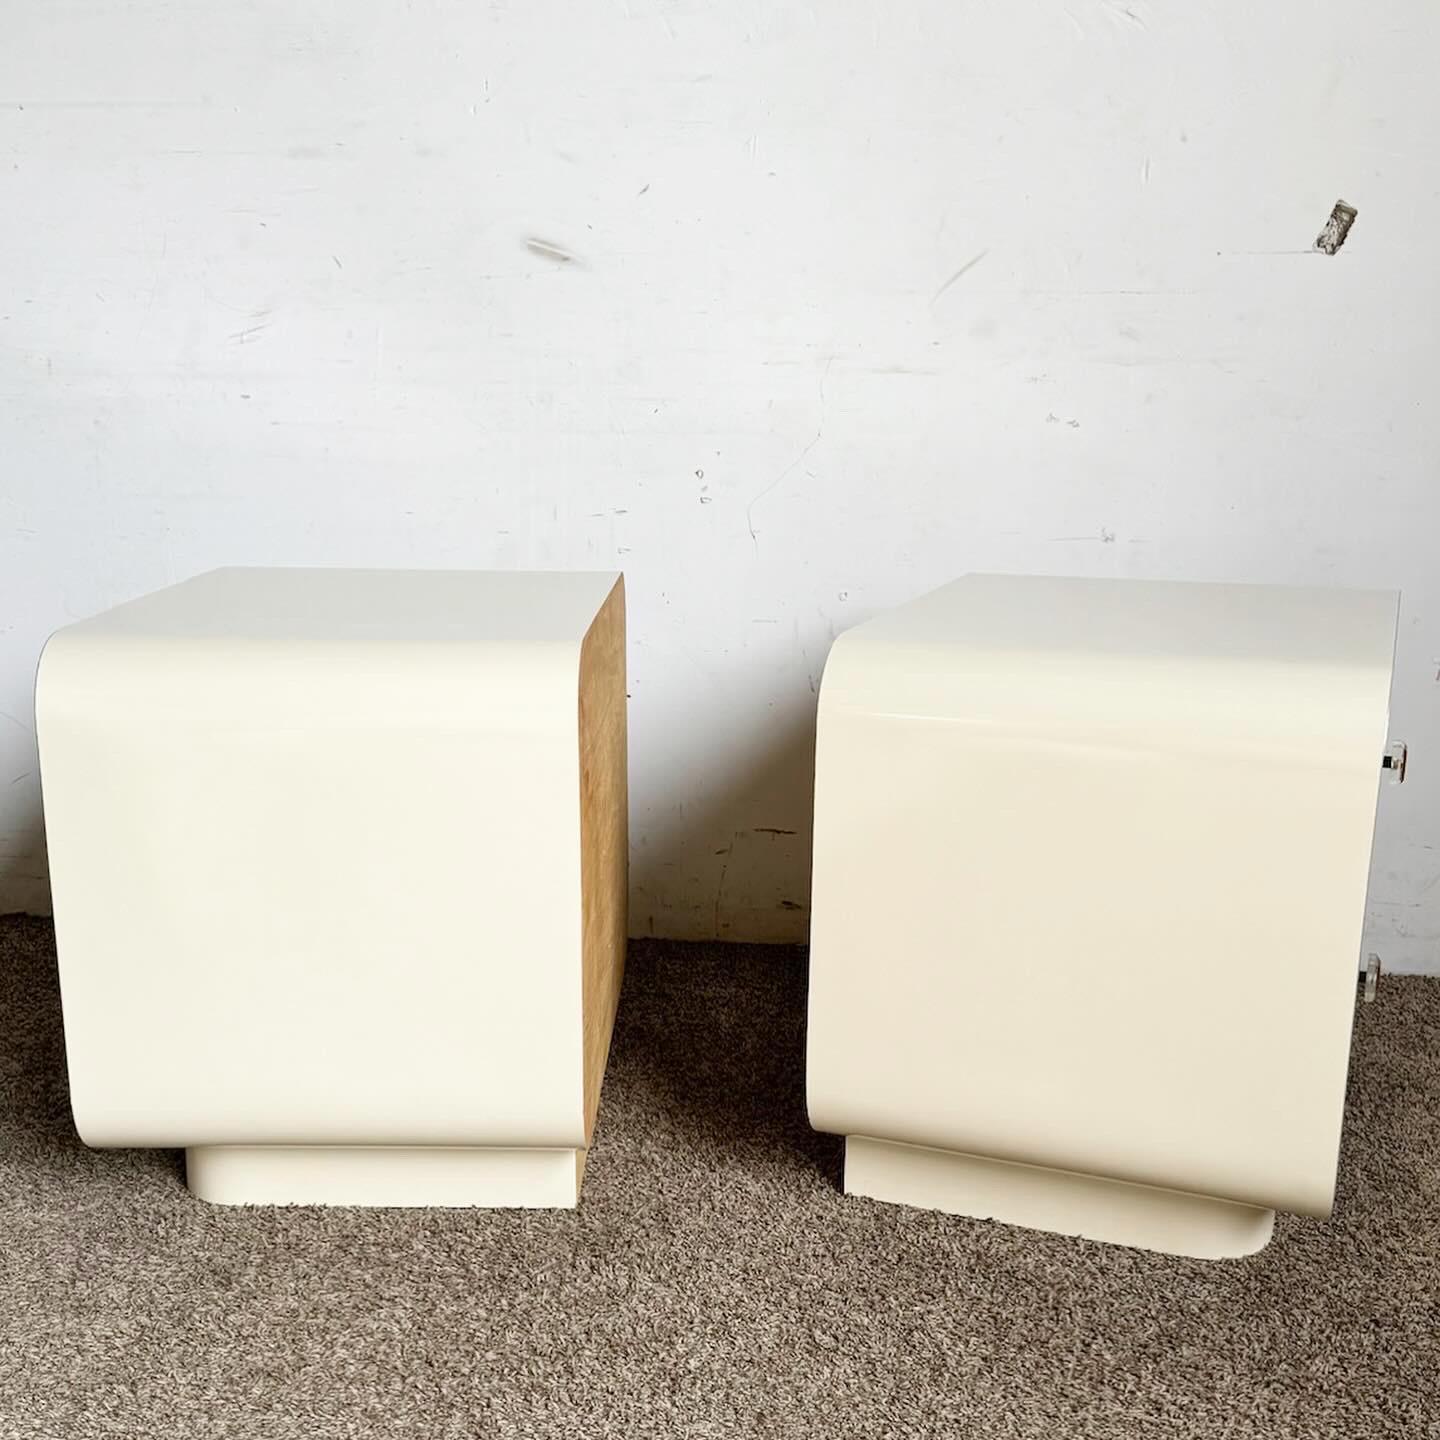 American Postmodern Cream Lacquer Laminate Waterfall Nightstands With Gold Trim